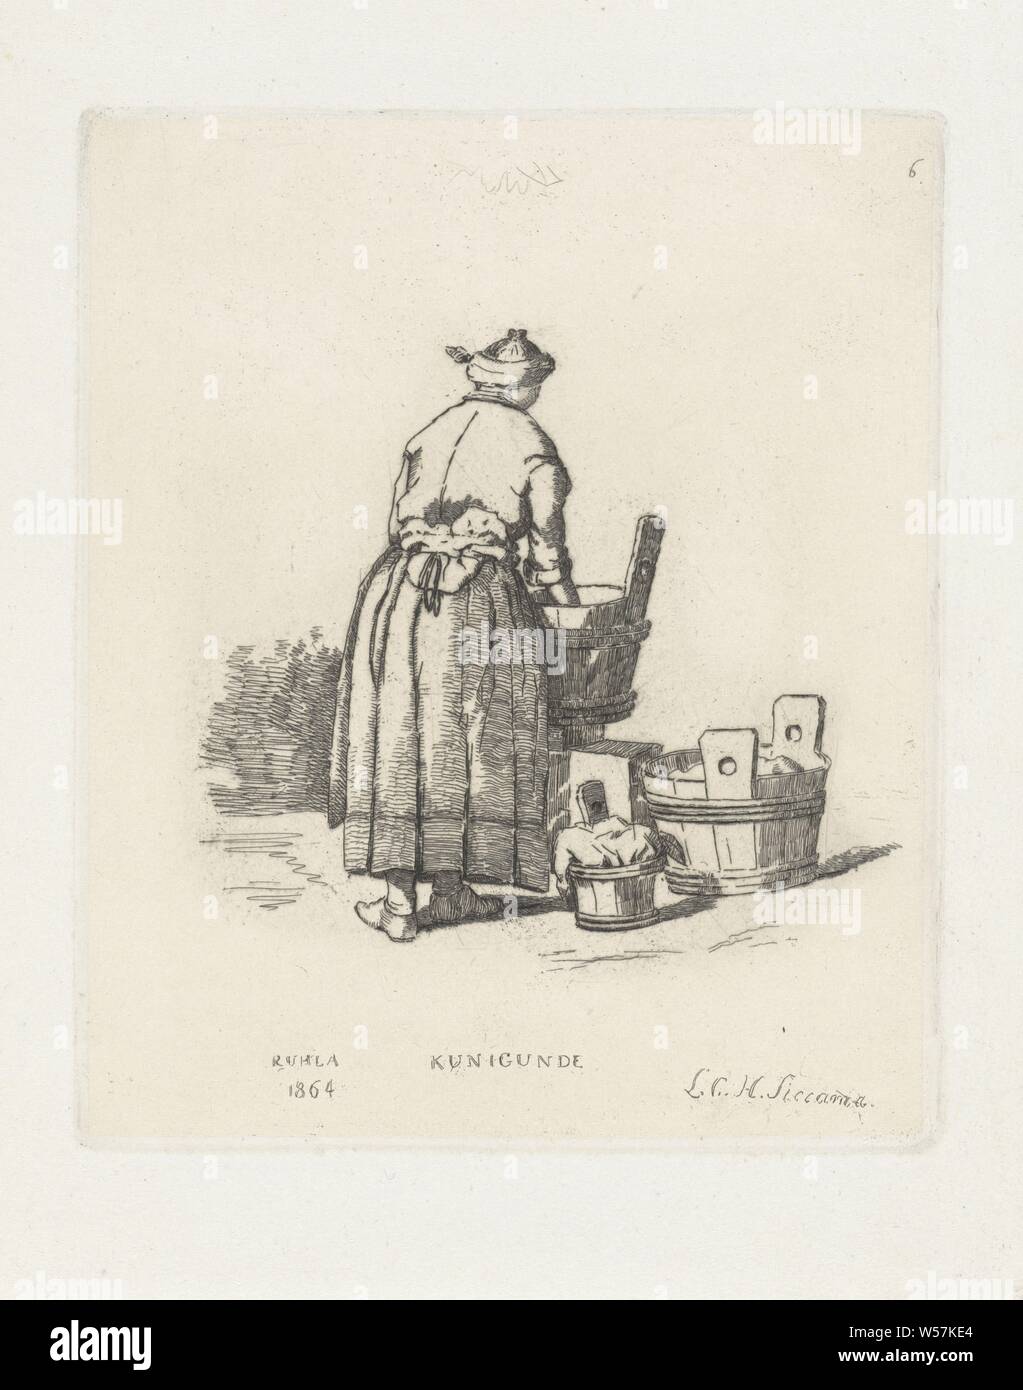 Laundress Kunigunde (title on object), A woman does laundry in a large tub. A second tub stands on the floor next to her. In addition, a smaller tub with laundry, wash house, home laundry, laundry room, Louis Charles Hora Siccama (mentioned on object), Utrecht, 1864, paper, etching, h 146 mm × w 120 mm Stock Photo